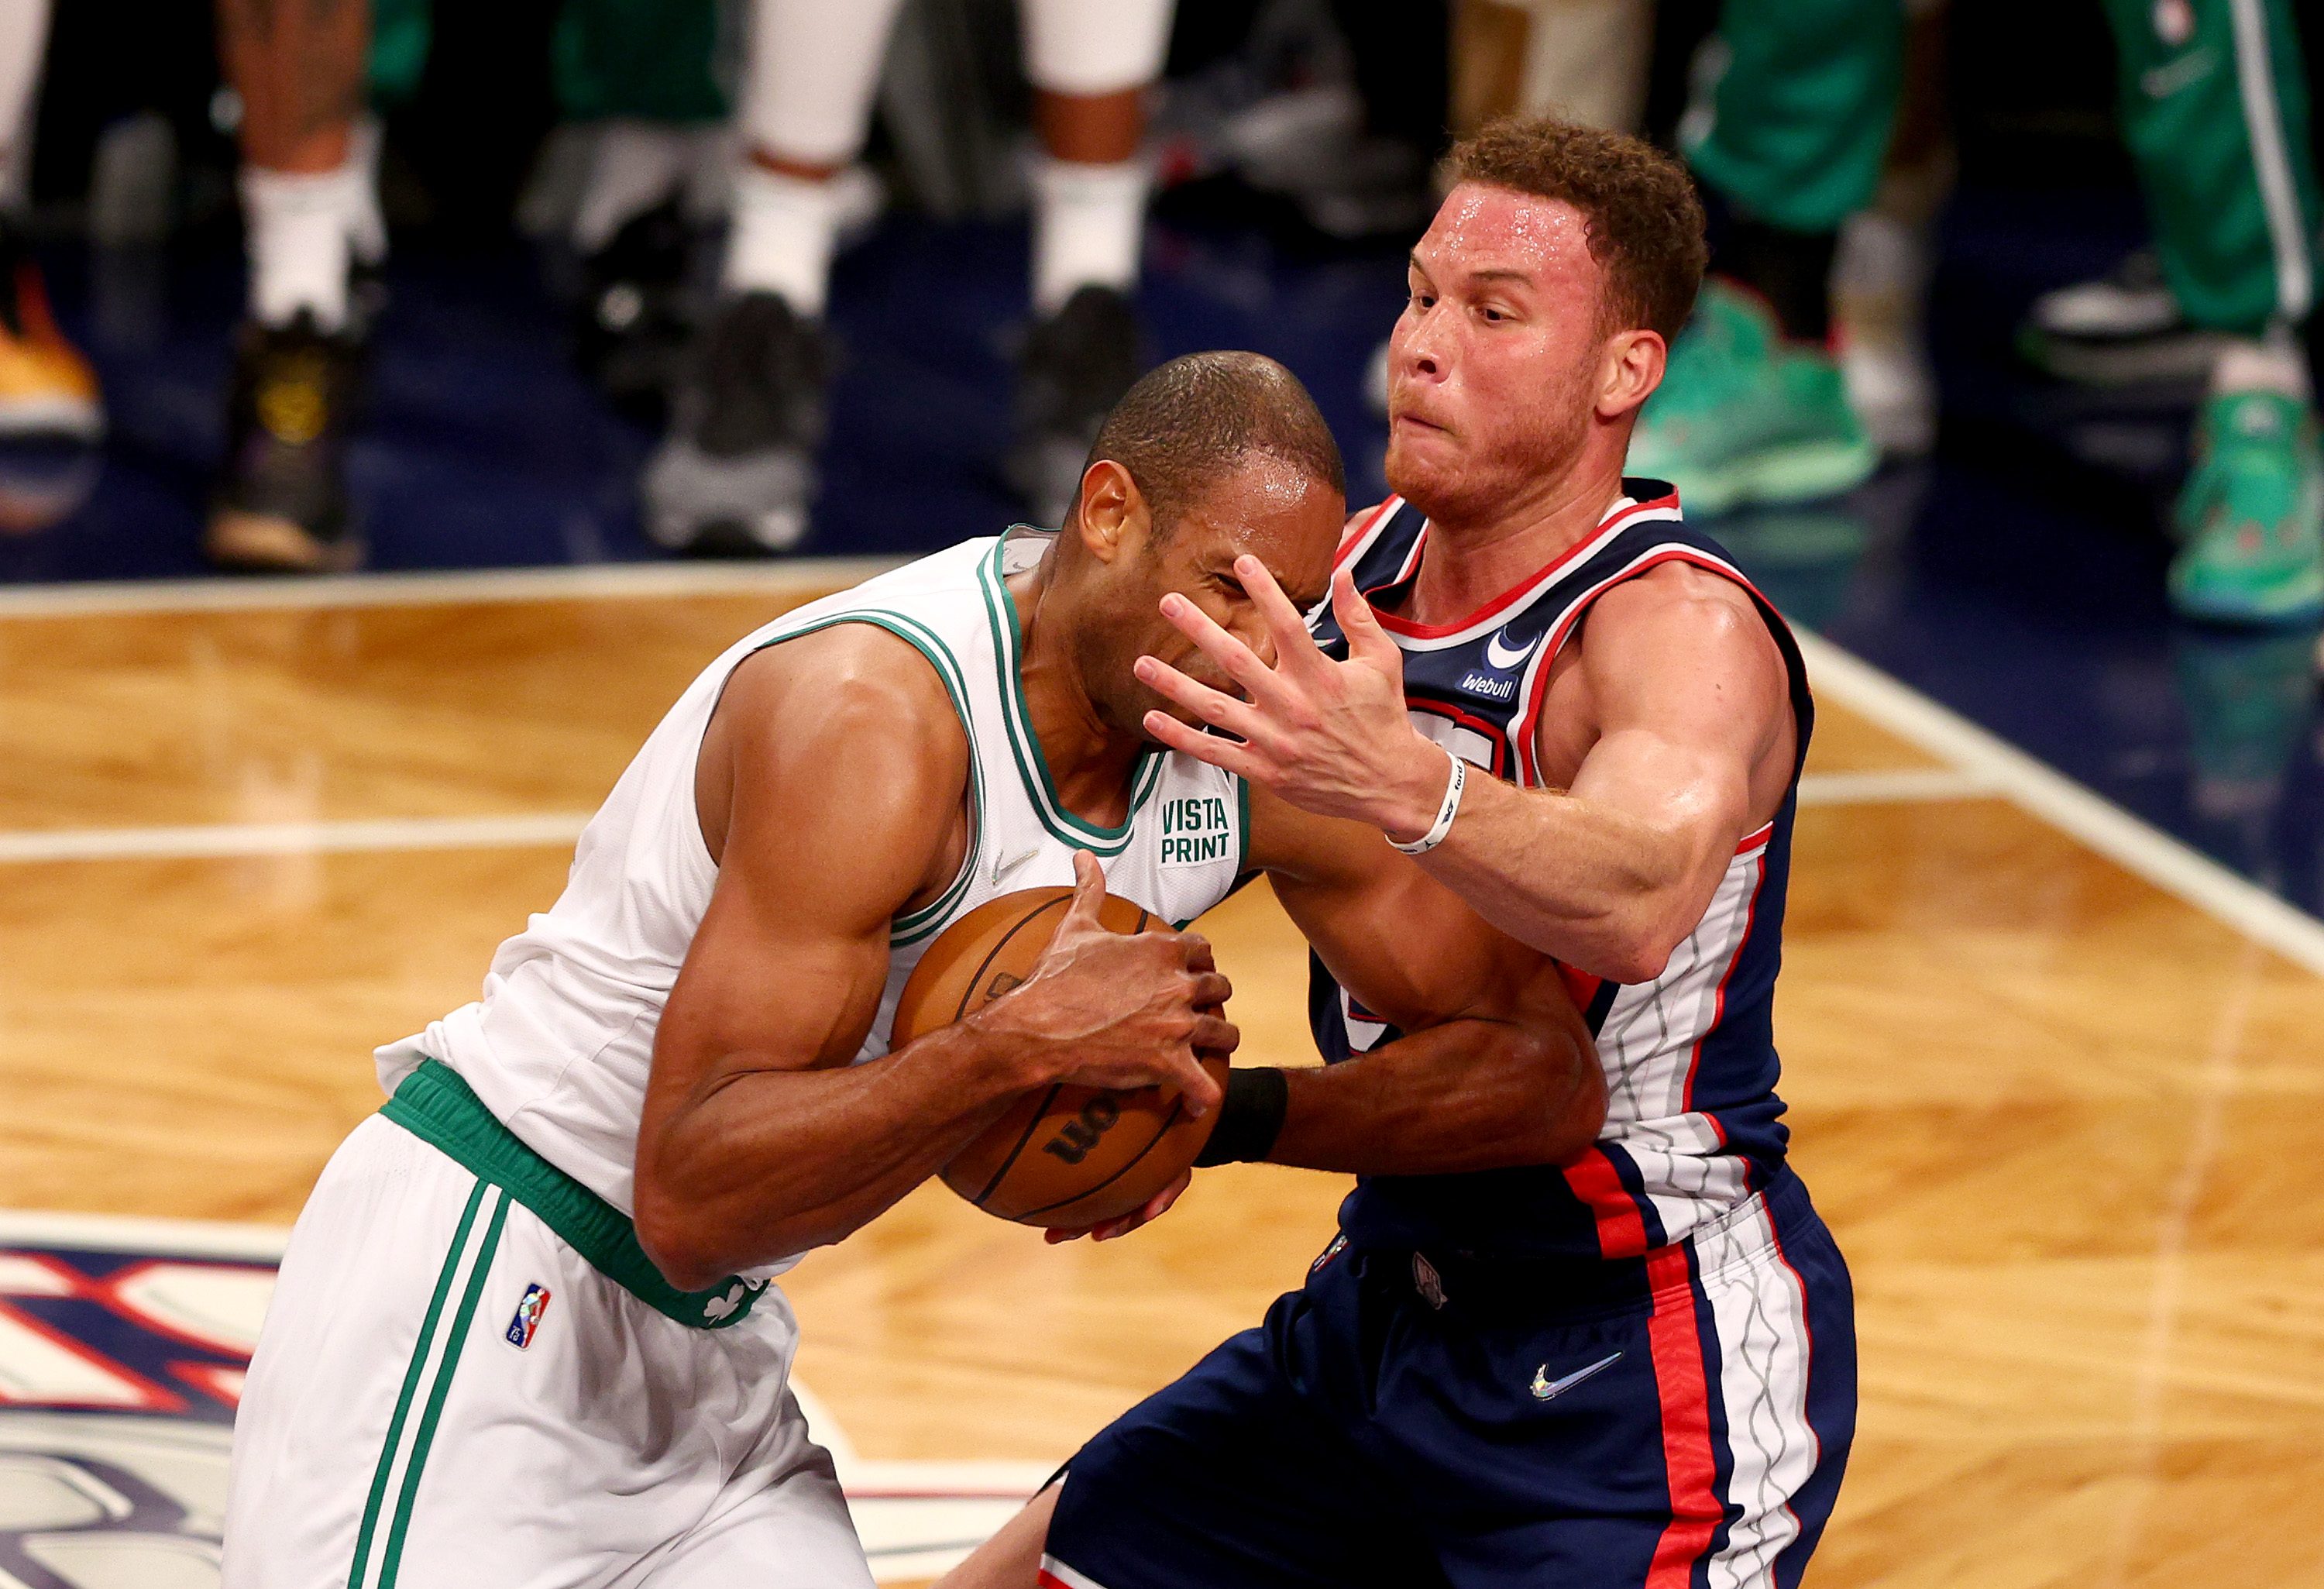 Al Horford of the Boston Celtics tries to get past Blake Griffin of the Brooklyn Nets.